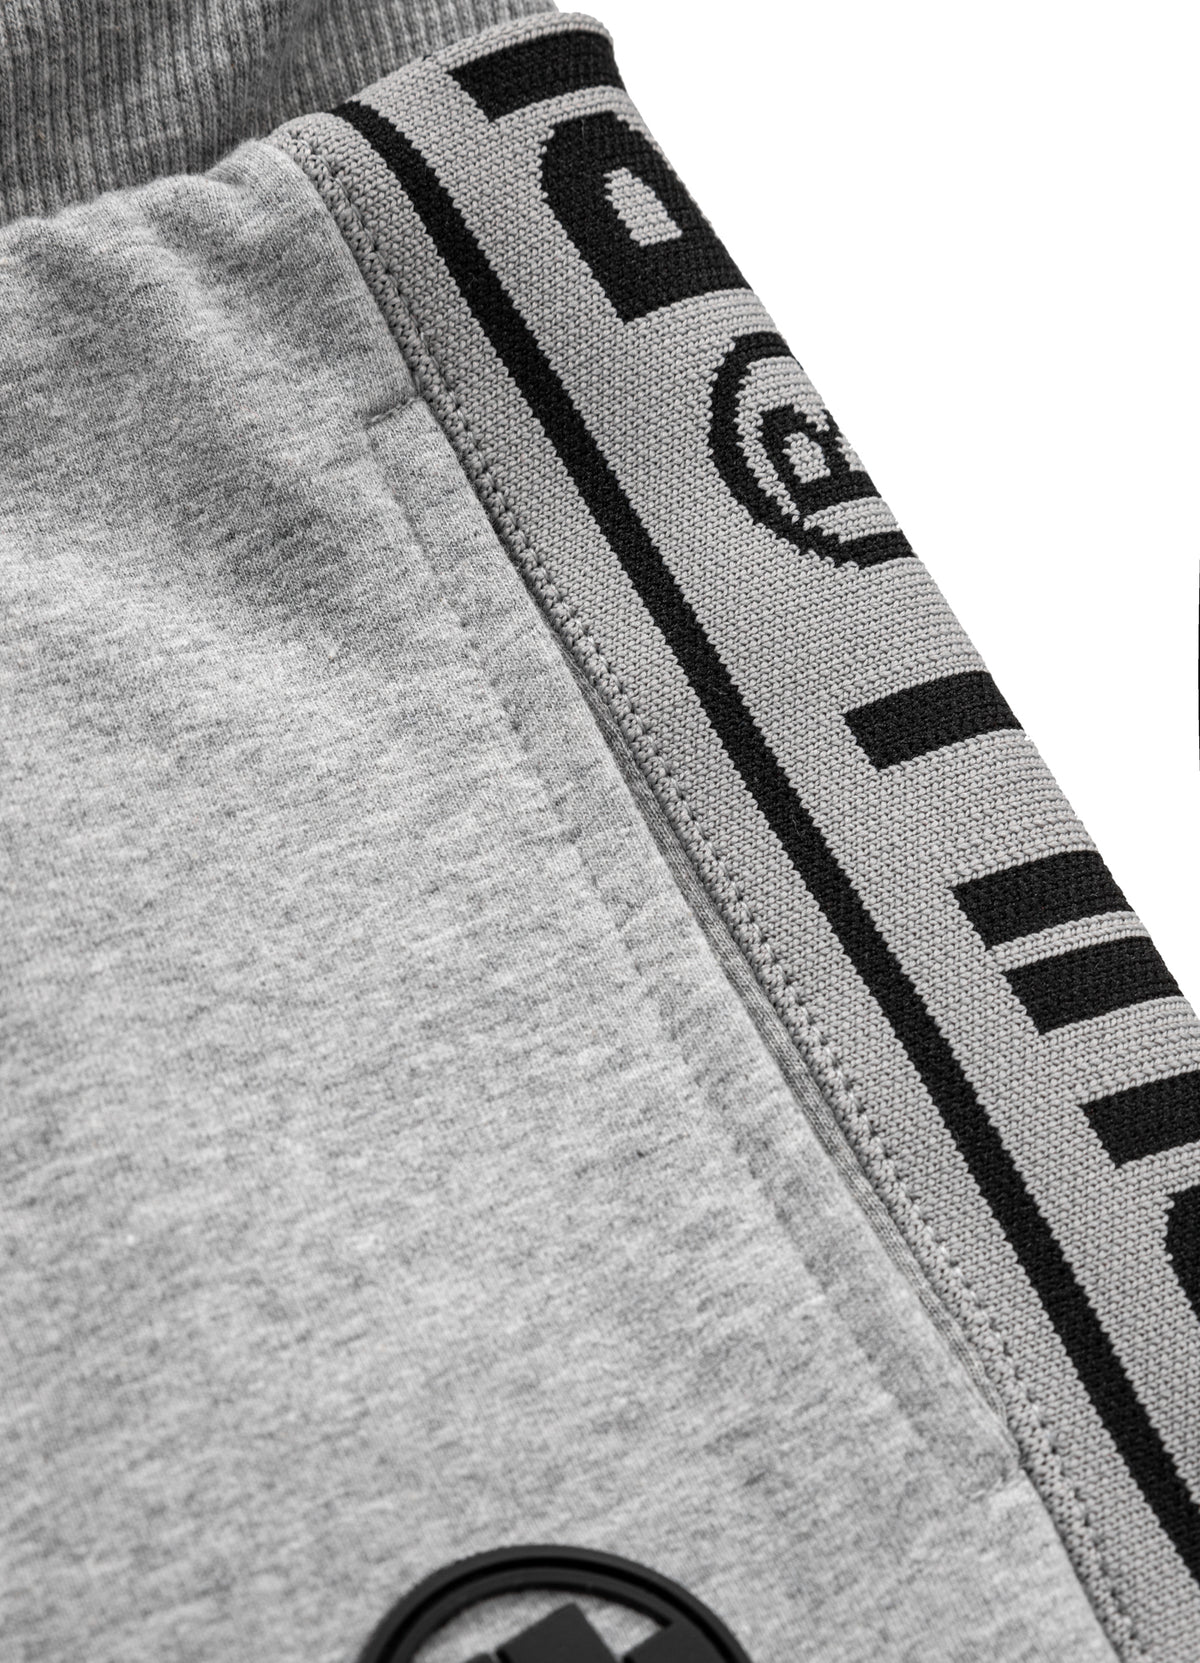 SMALL LOGO FRENCH TERRY 21 Grey Shorts.